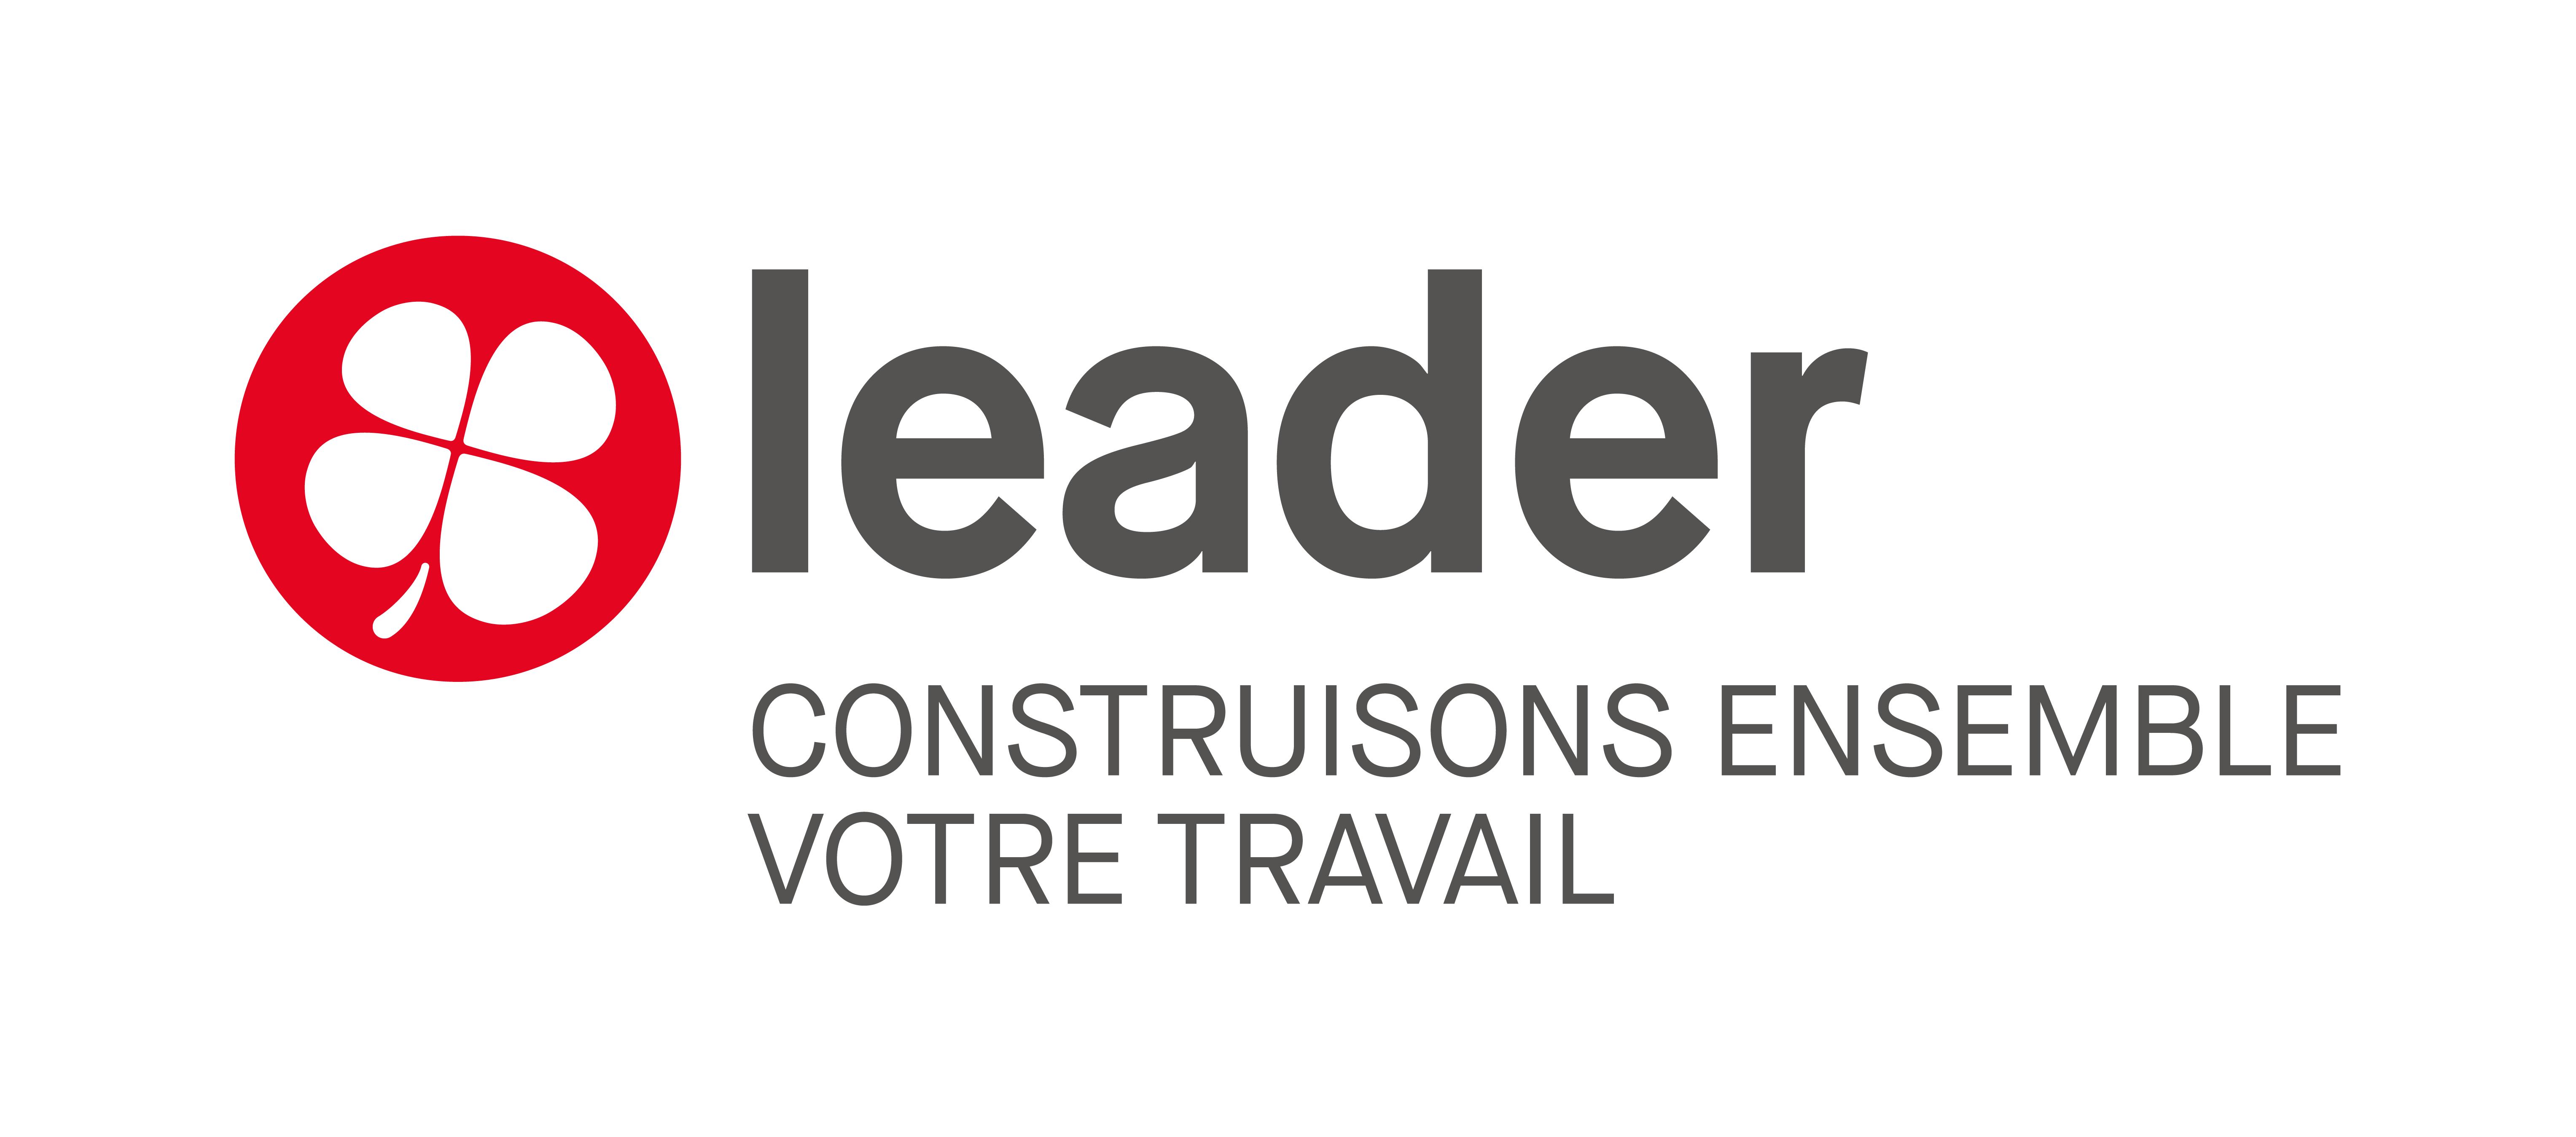 Groupe Leader